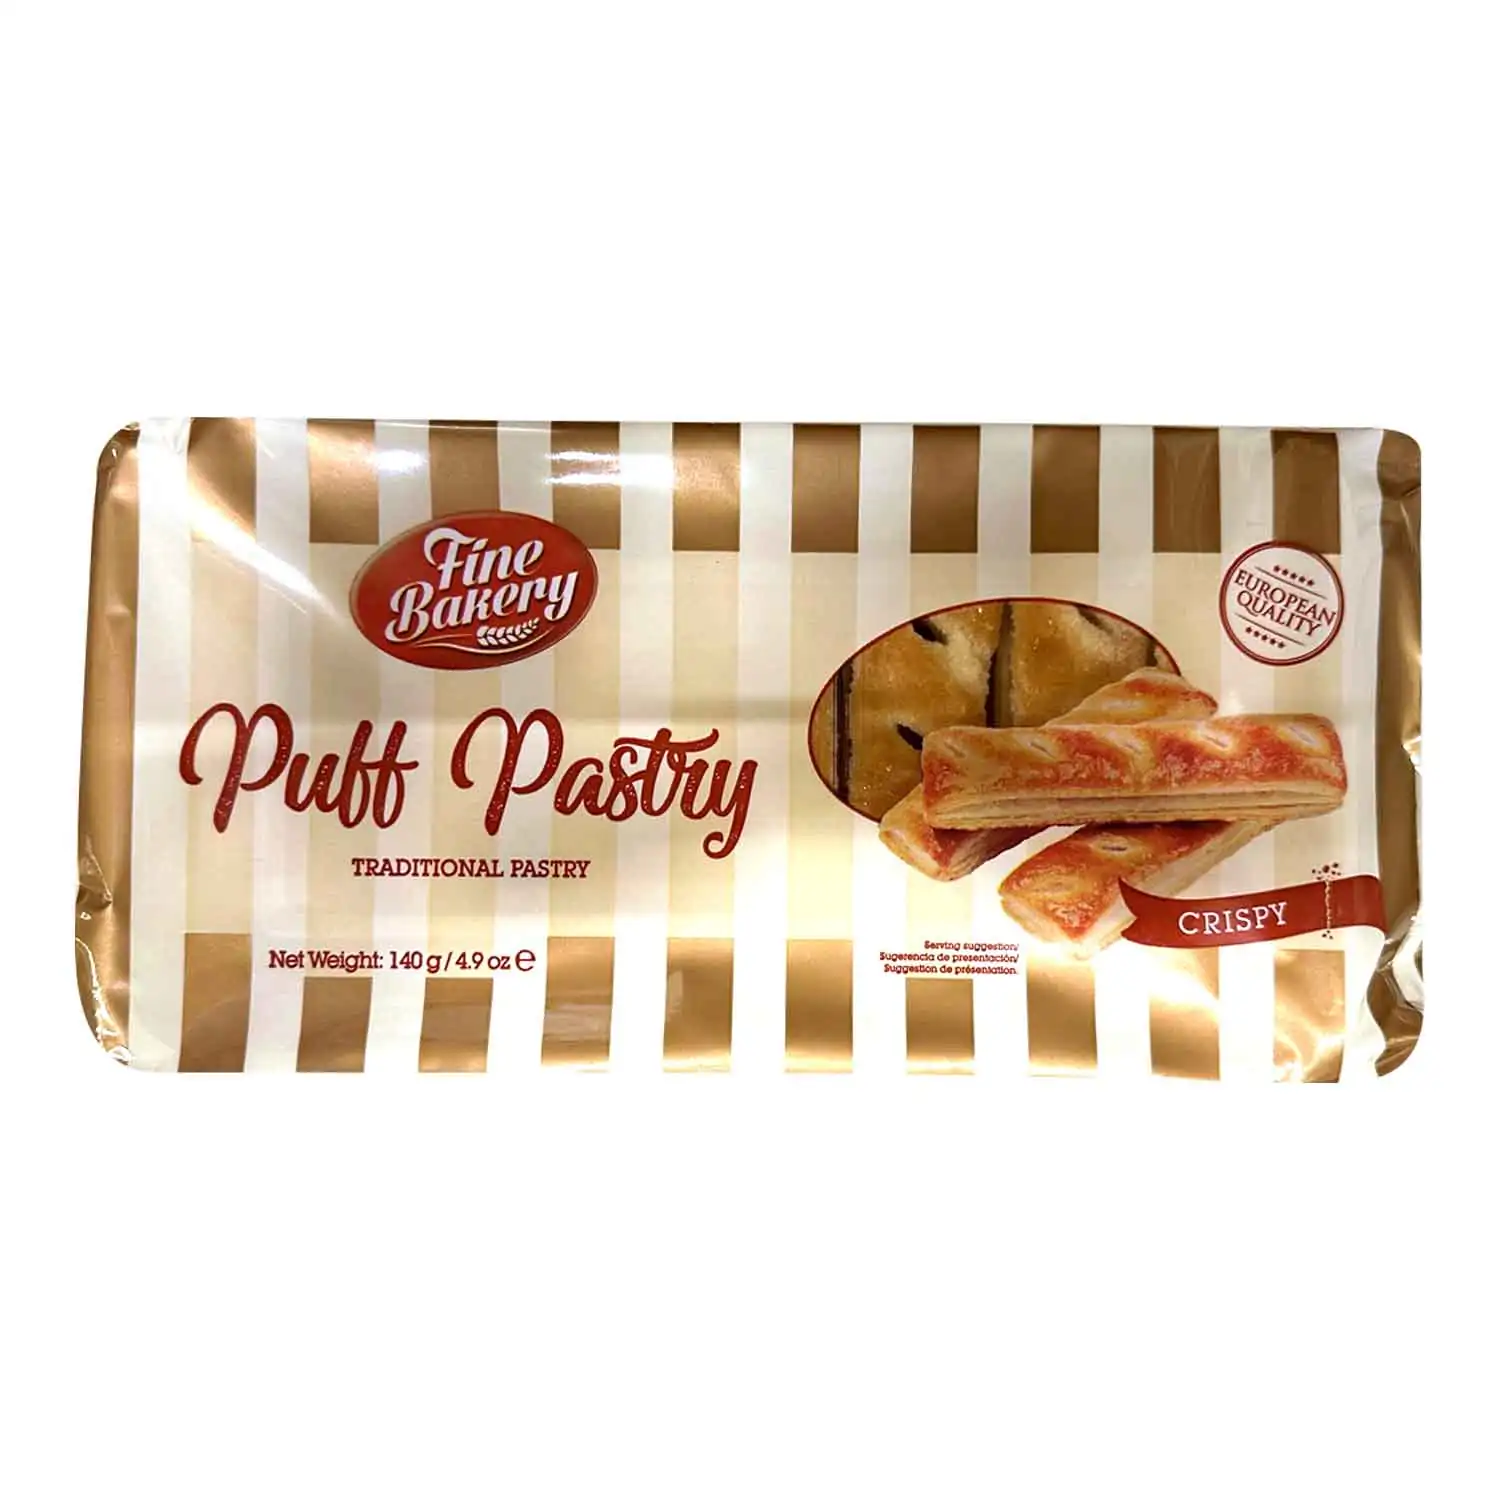 Puff Pastry 140g - Buy at Real Tobacco